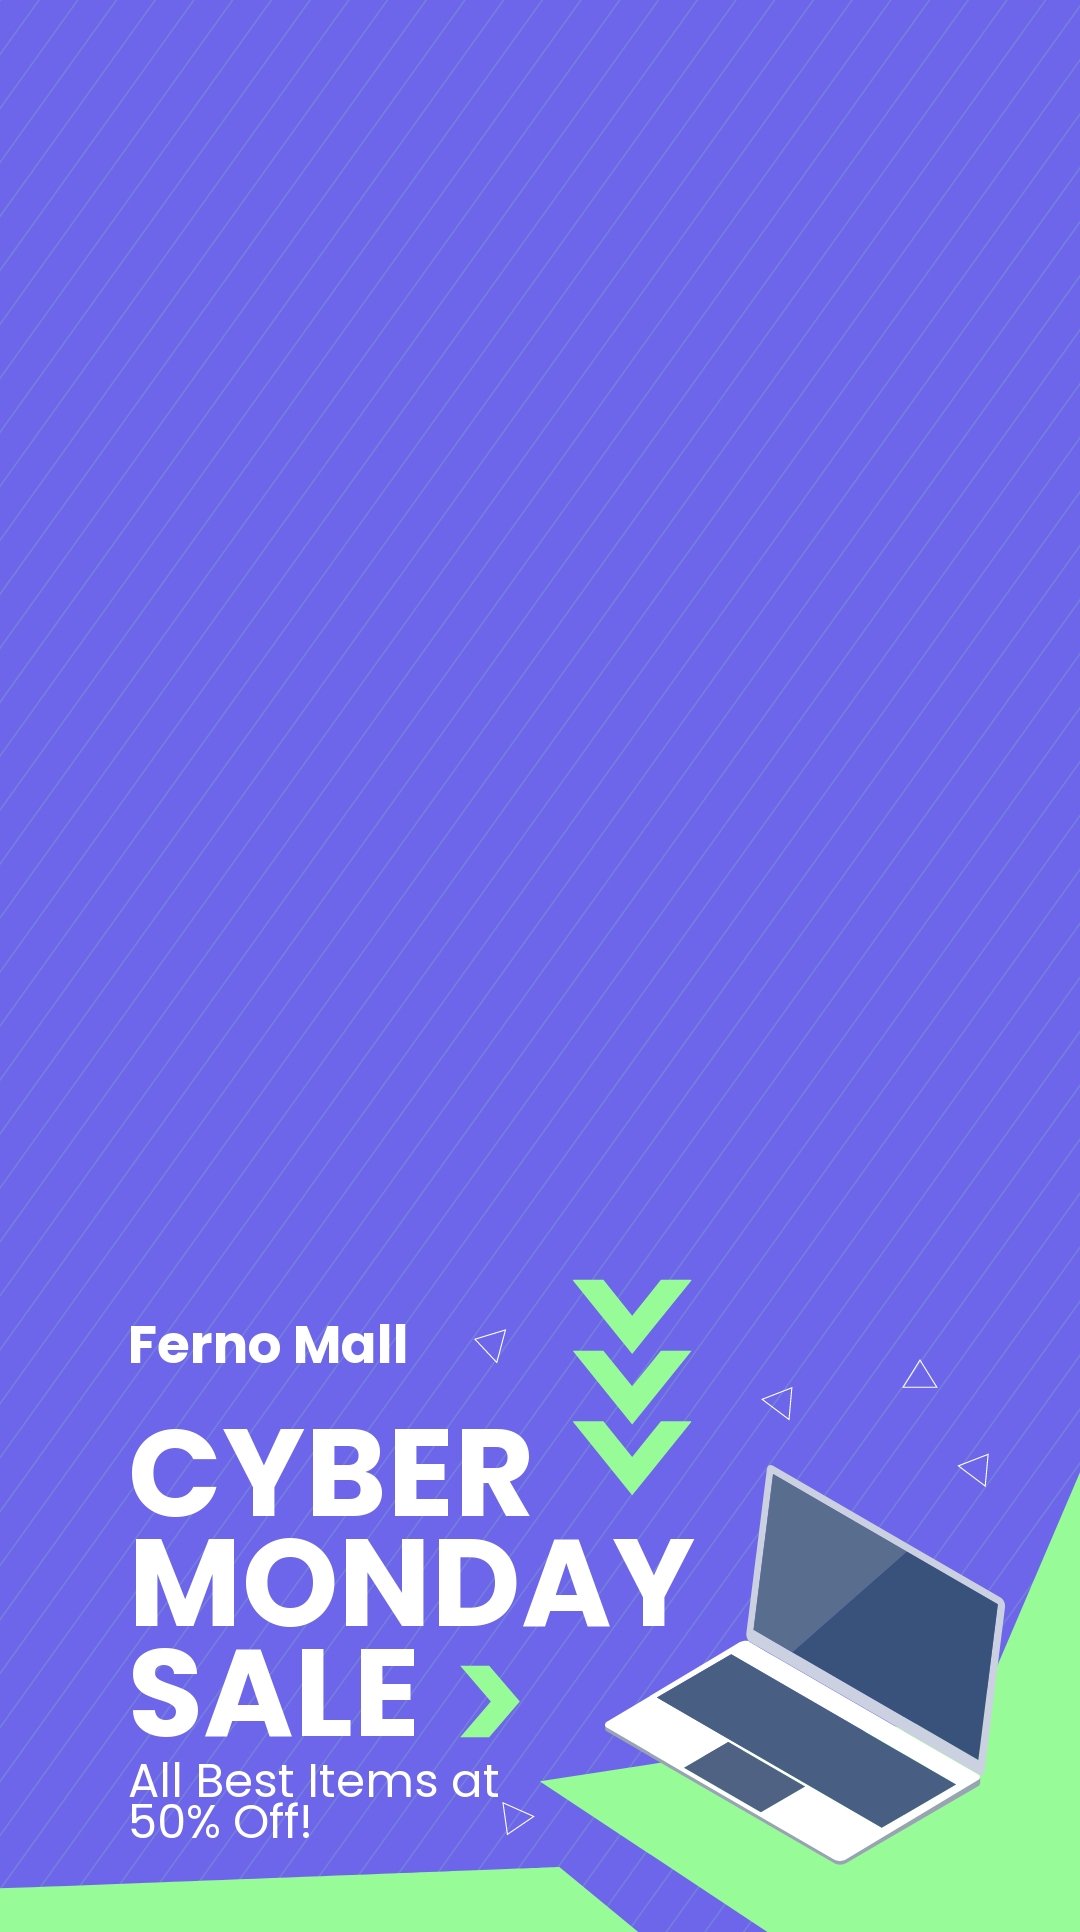 Cyber Monday Sales Event Snapchat Geofilter Template